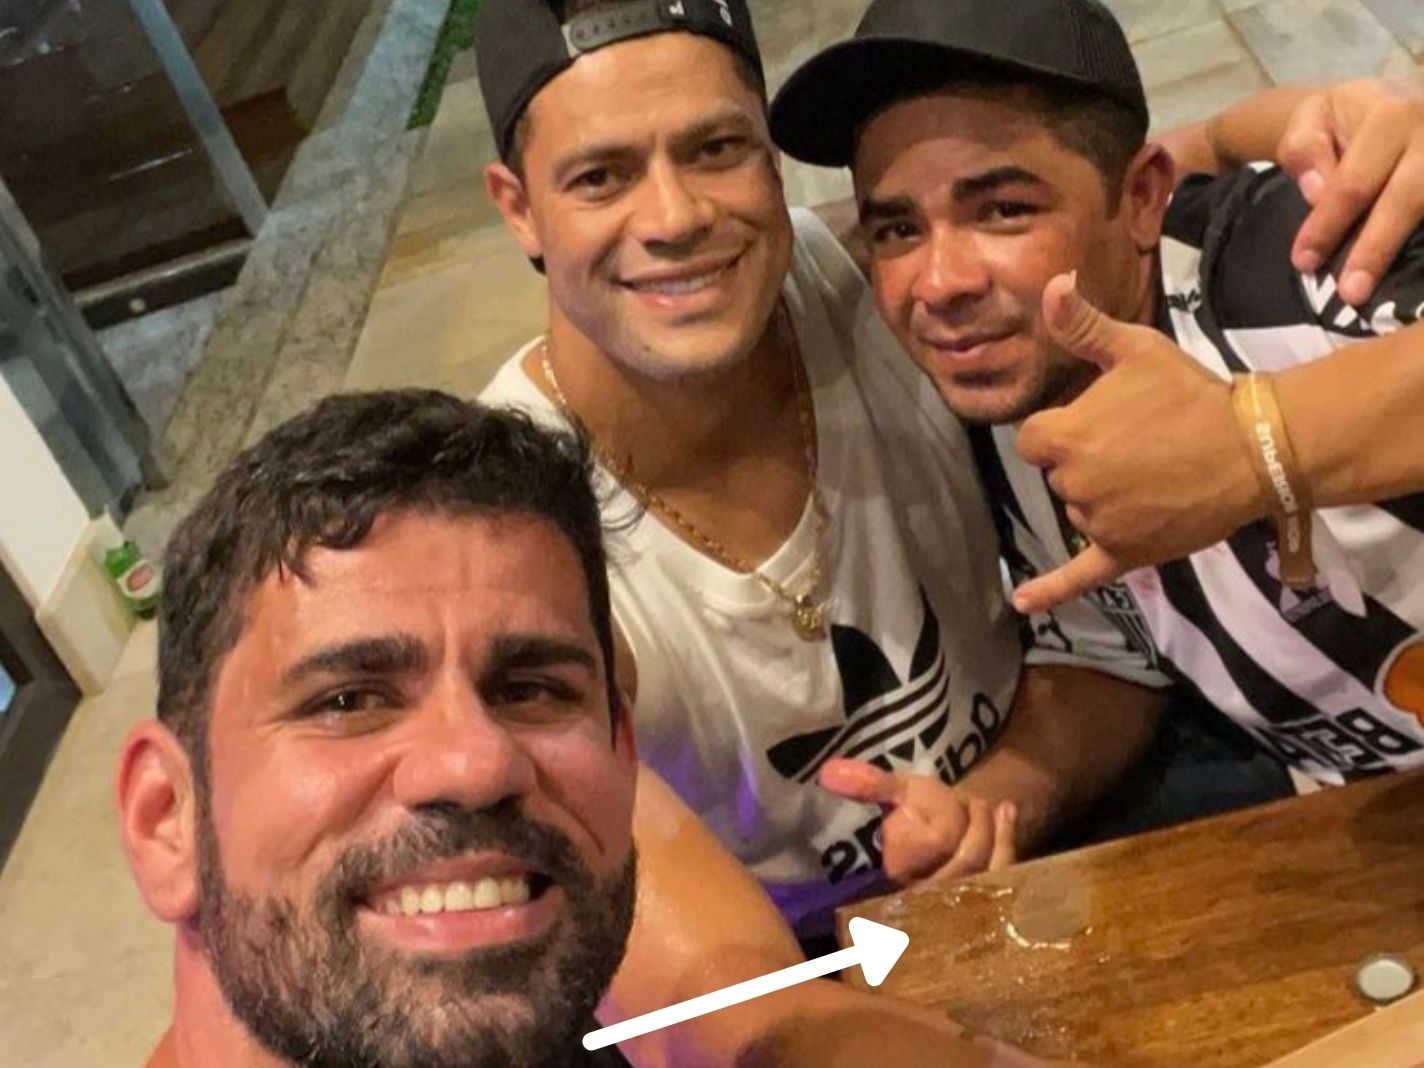 Twitter convinced Diego Costa and Hulk were doing coke together